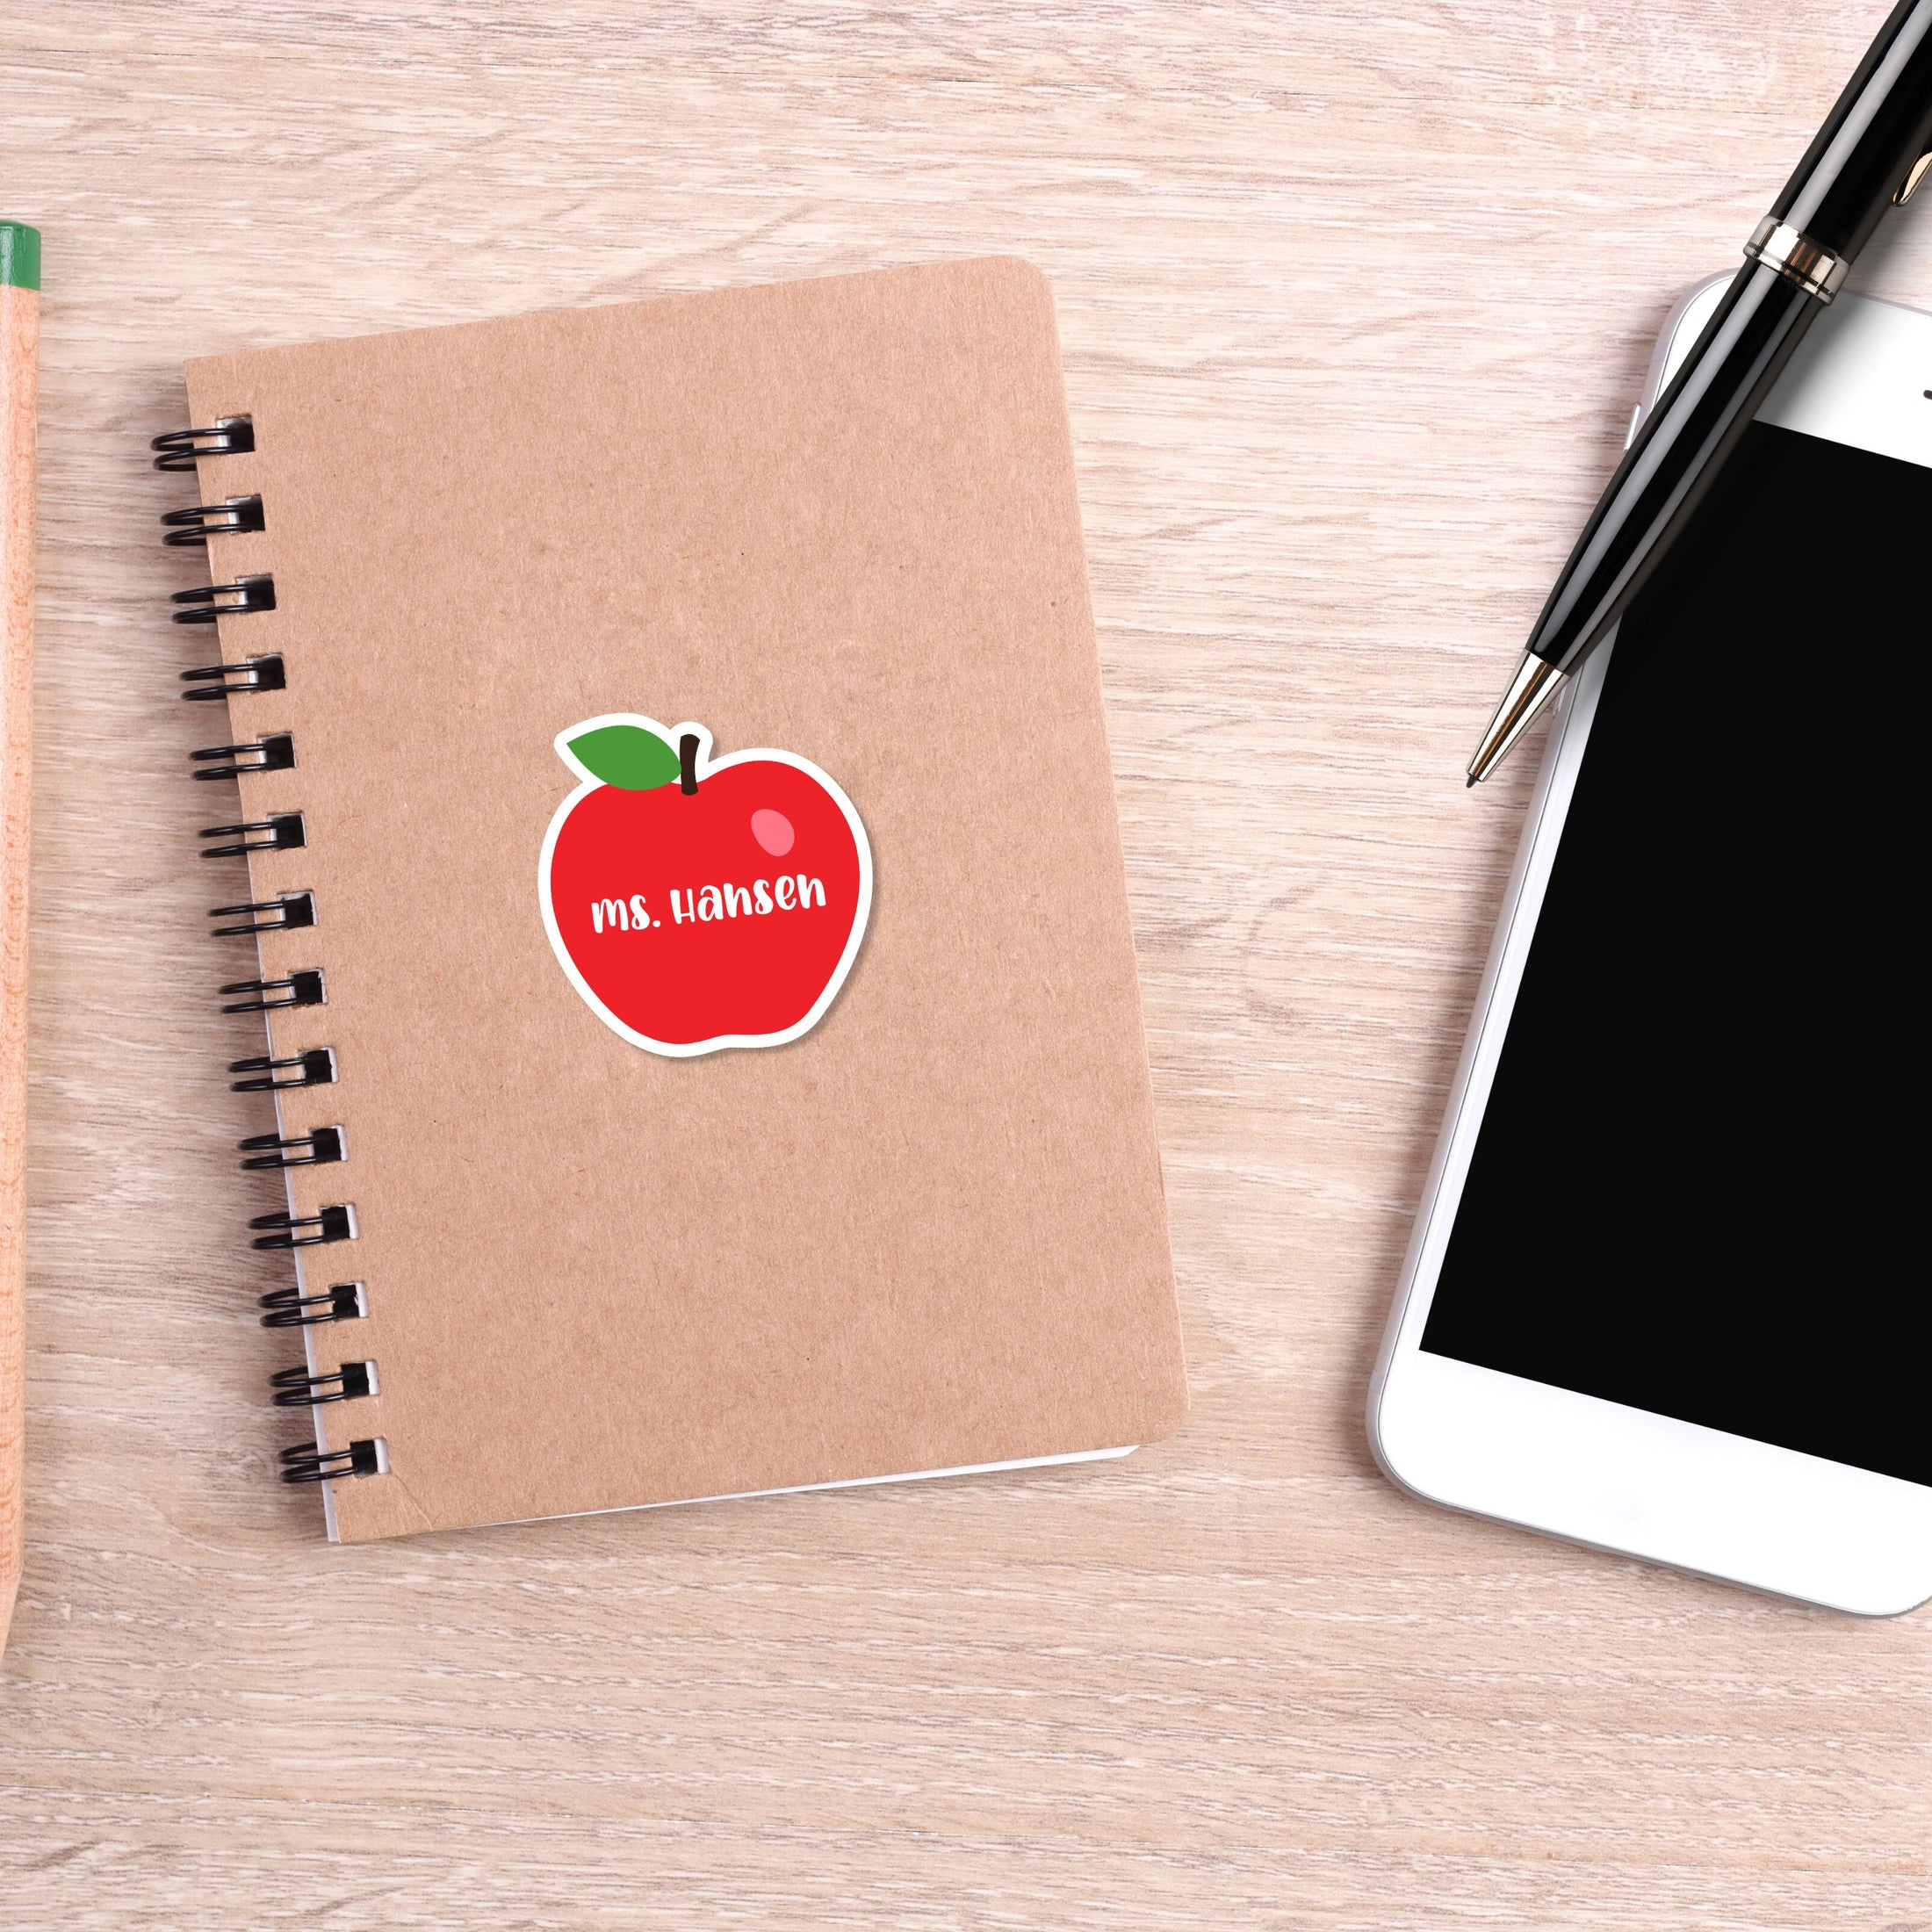 This image shows the personalized school sticker on a notebook next to a smartphone and pen.